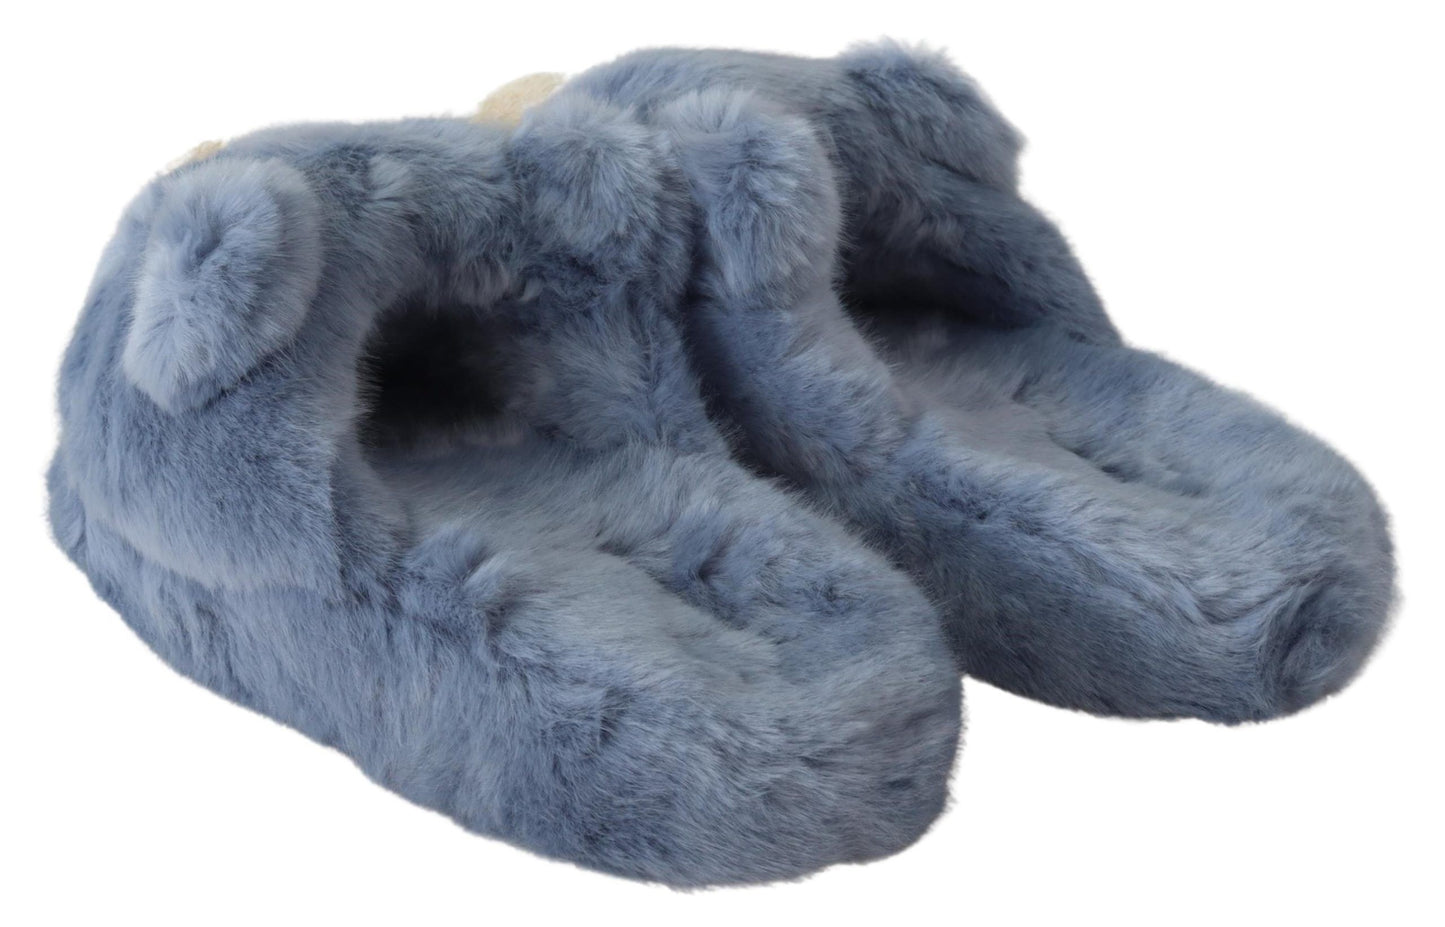 Dolce & Gabbana Chic Teddy Bear Blue Loafers Shoes - Gio Beverly Hills